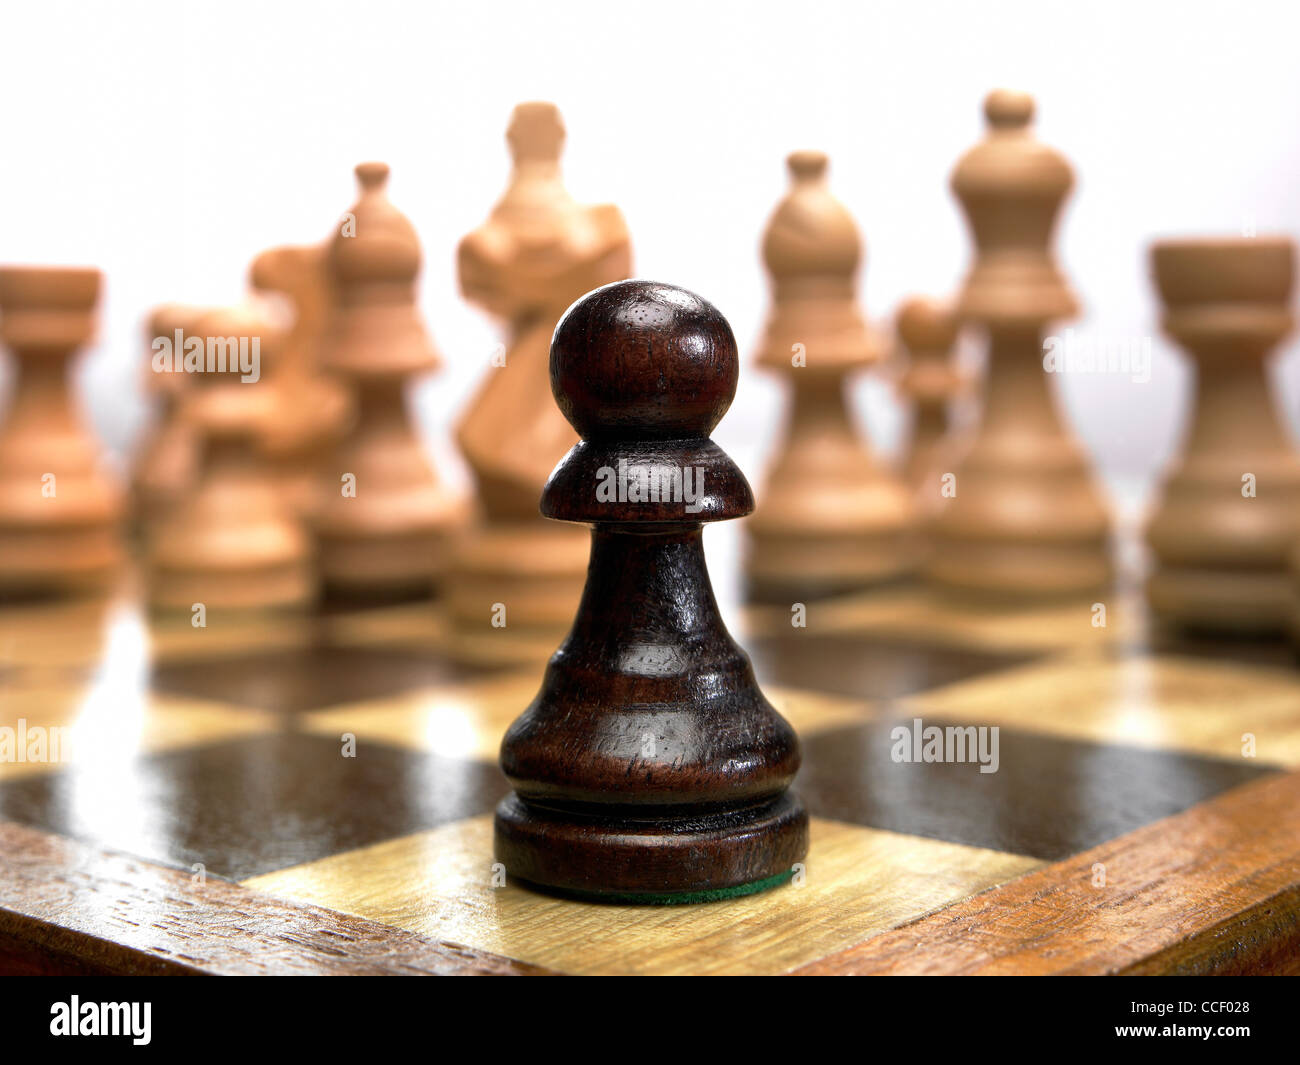 A pawn chess piece on a chessboard Stock Photo